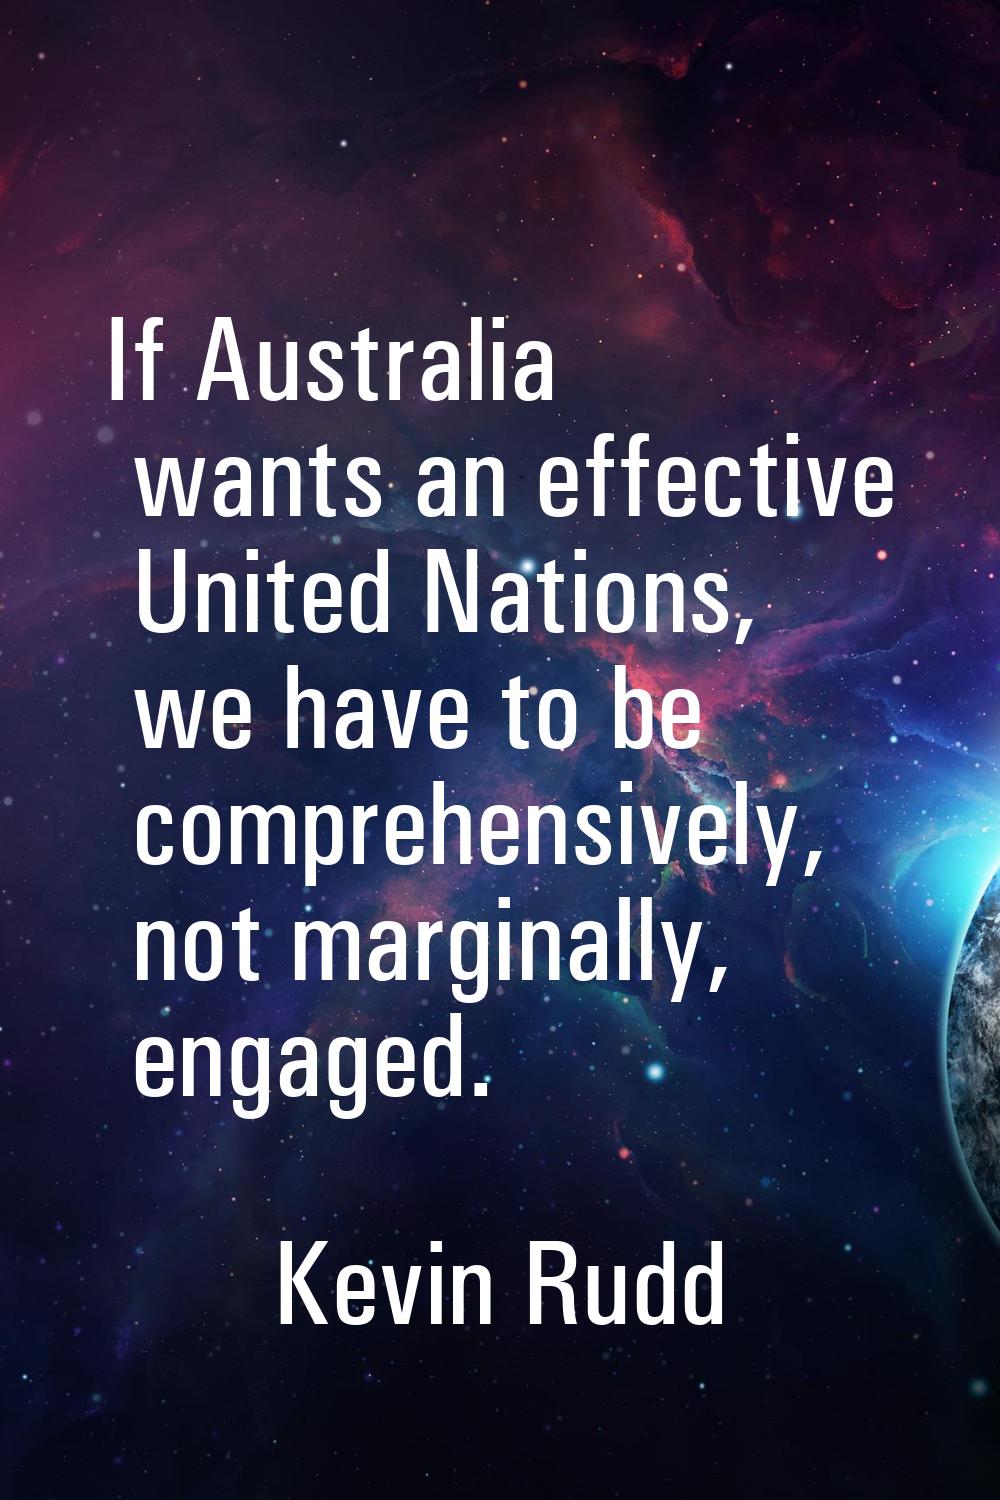 If Australia wants an effective United Nations, we have to be comprehensively, not marginally, enga